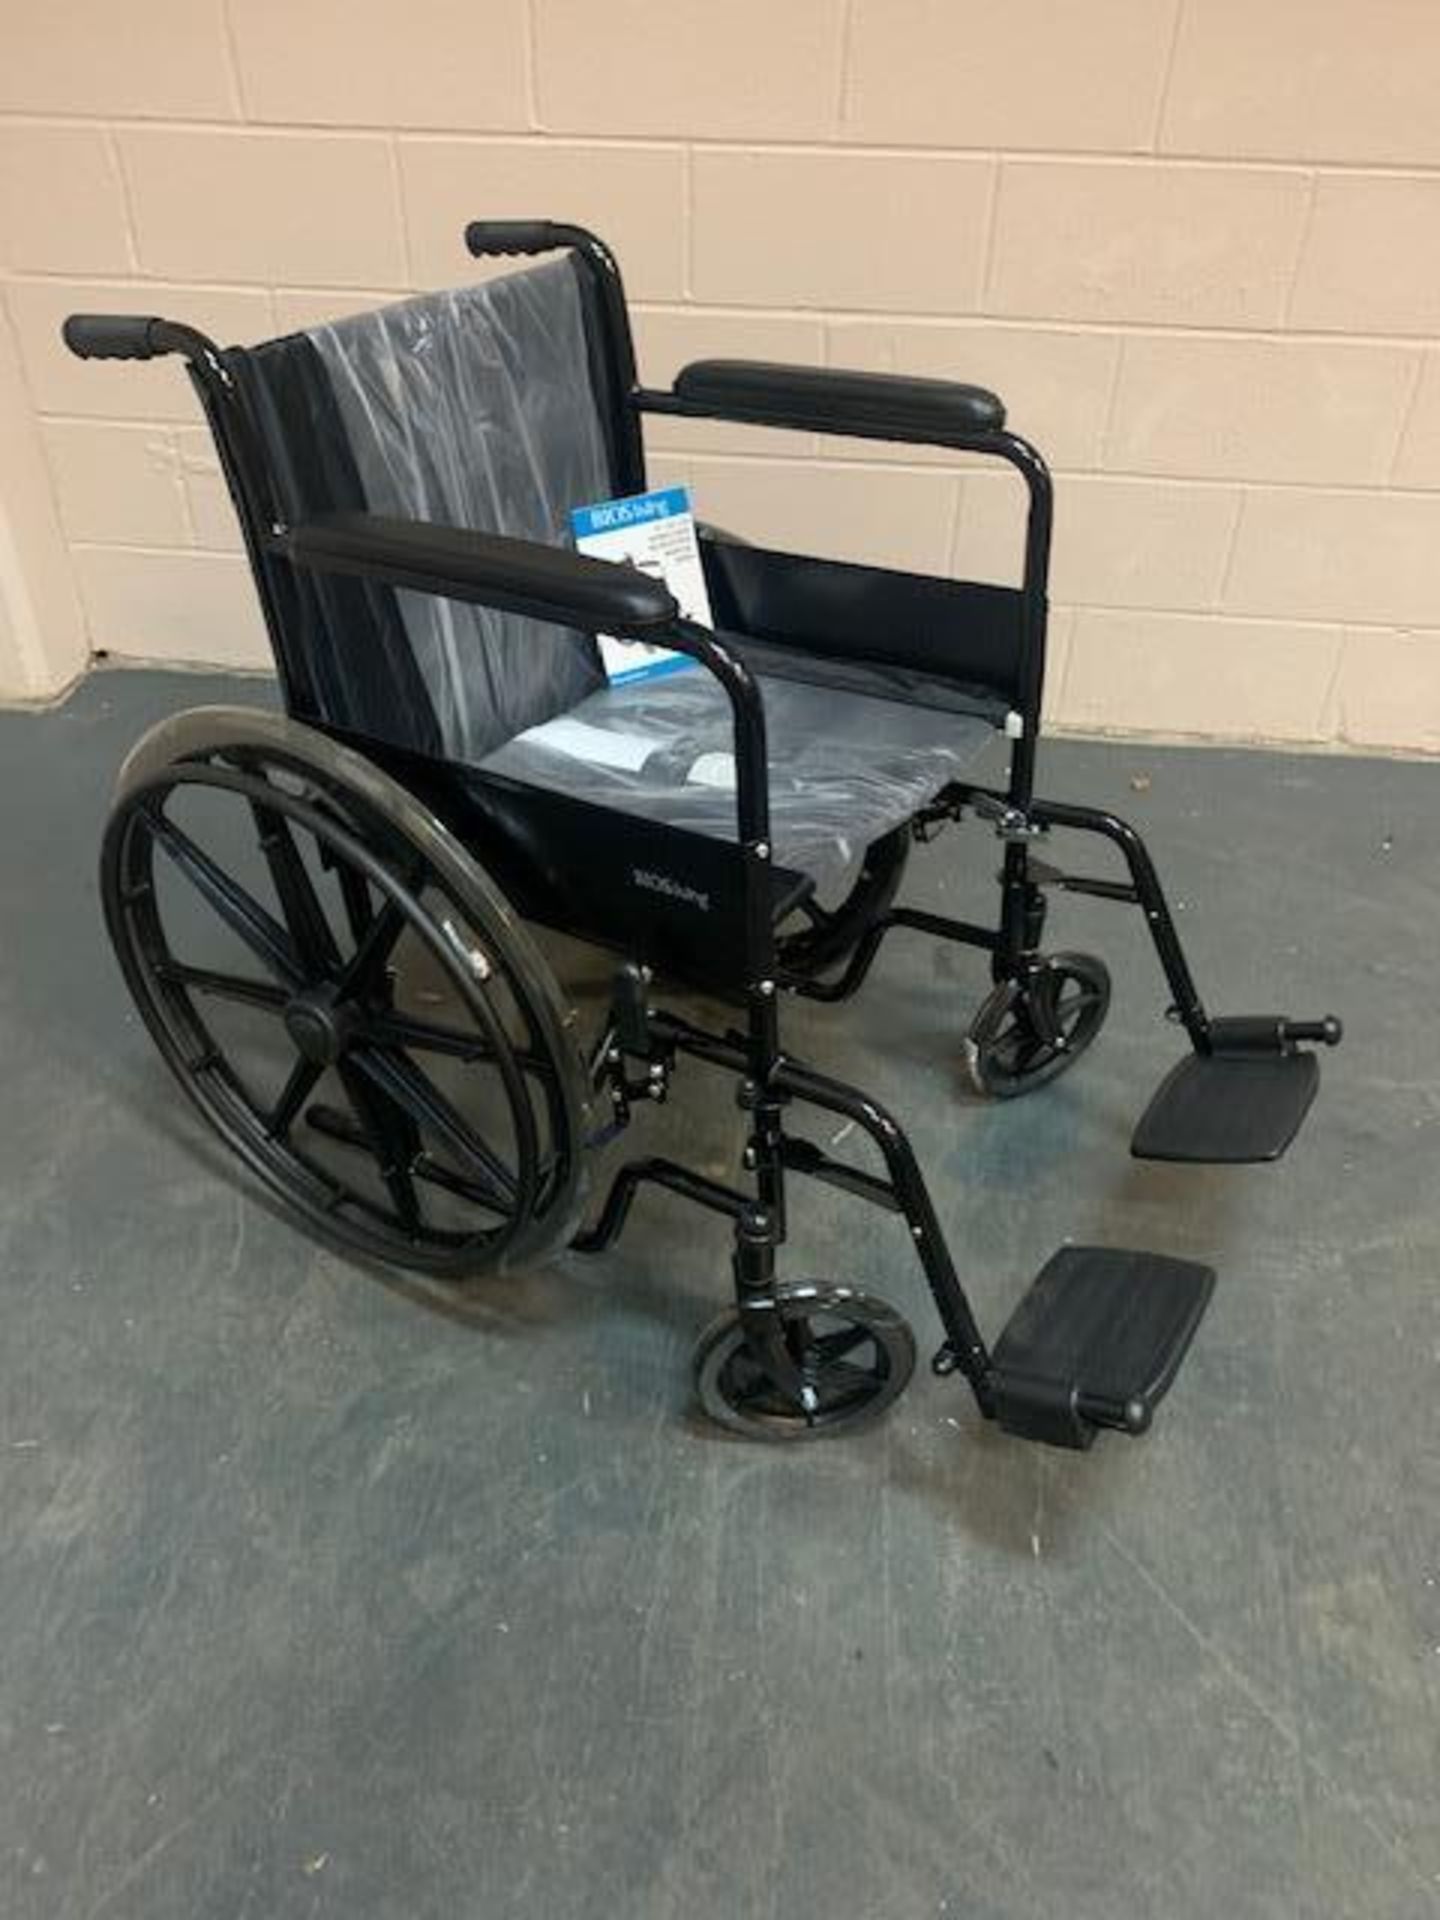 New In Box BIOS Living 18 inch / 45 cm Wheelchair Tool Free Assembly